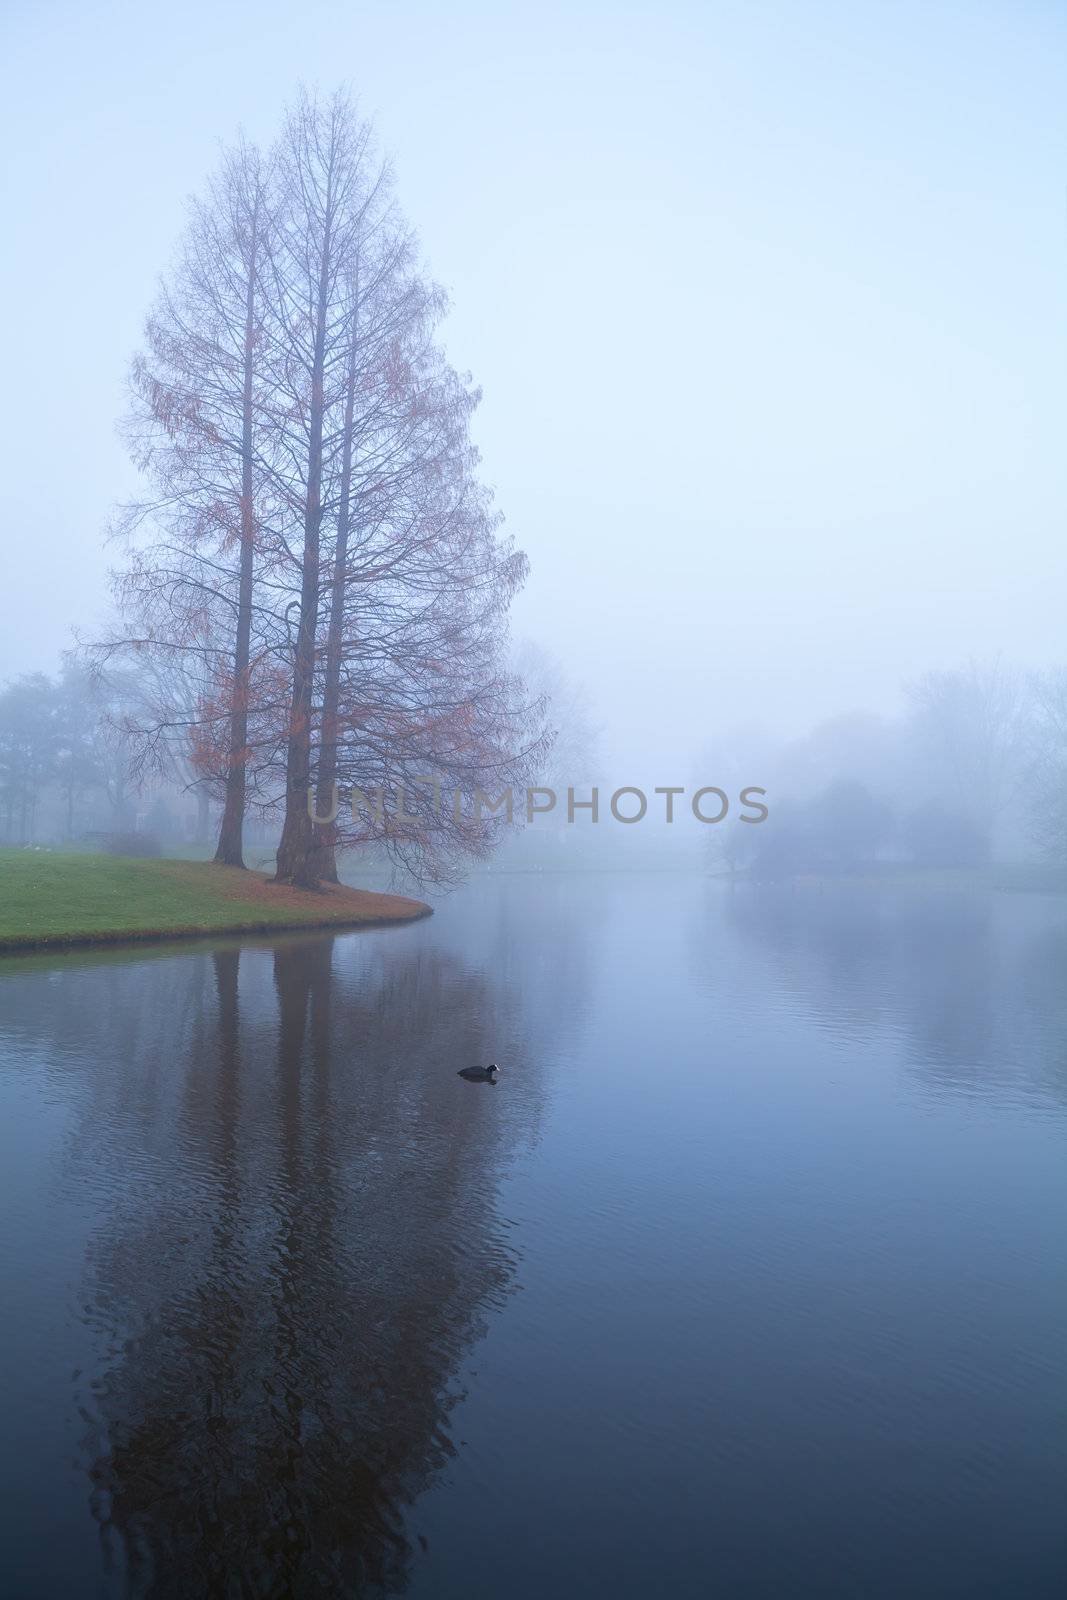 trees and lake in fog by catolla